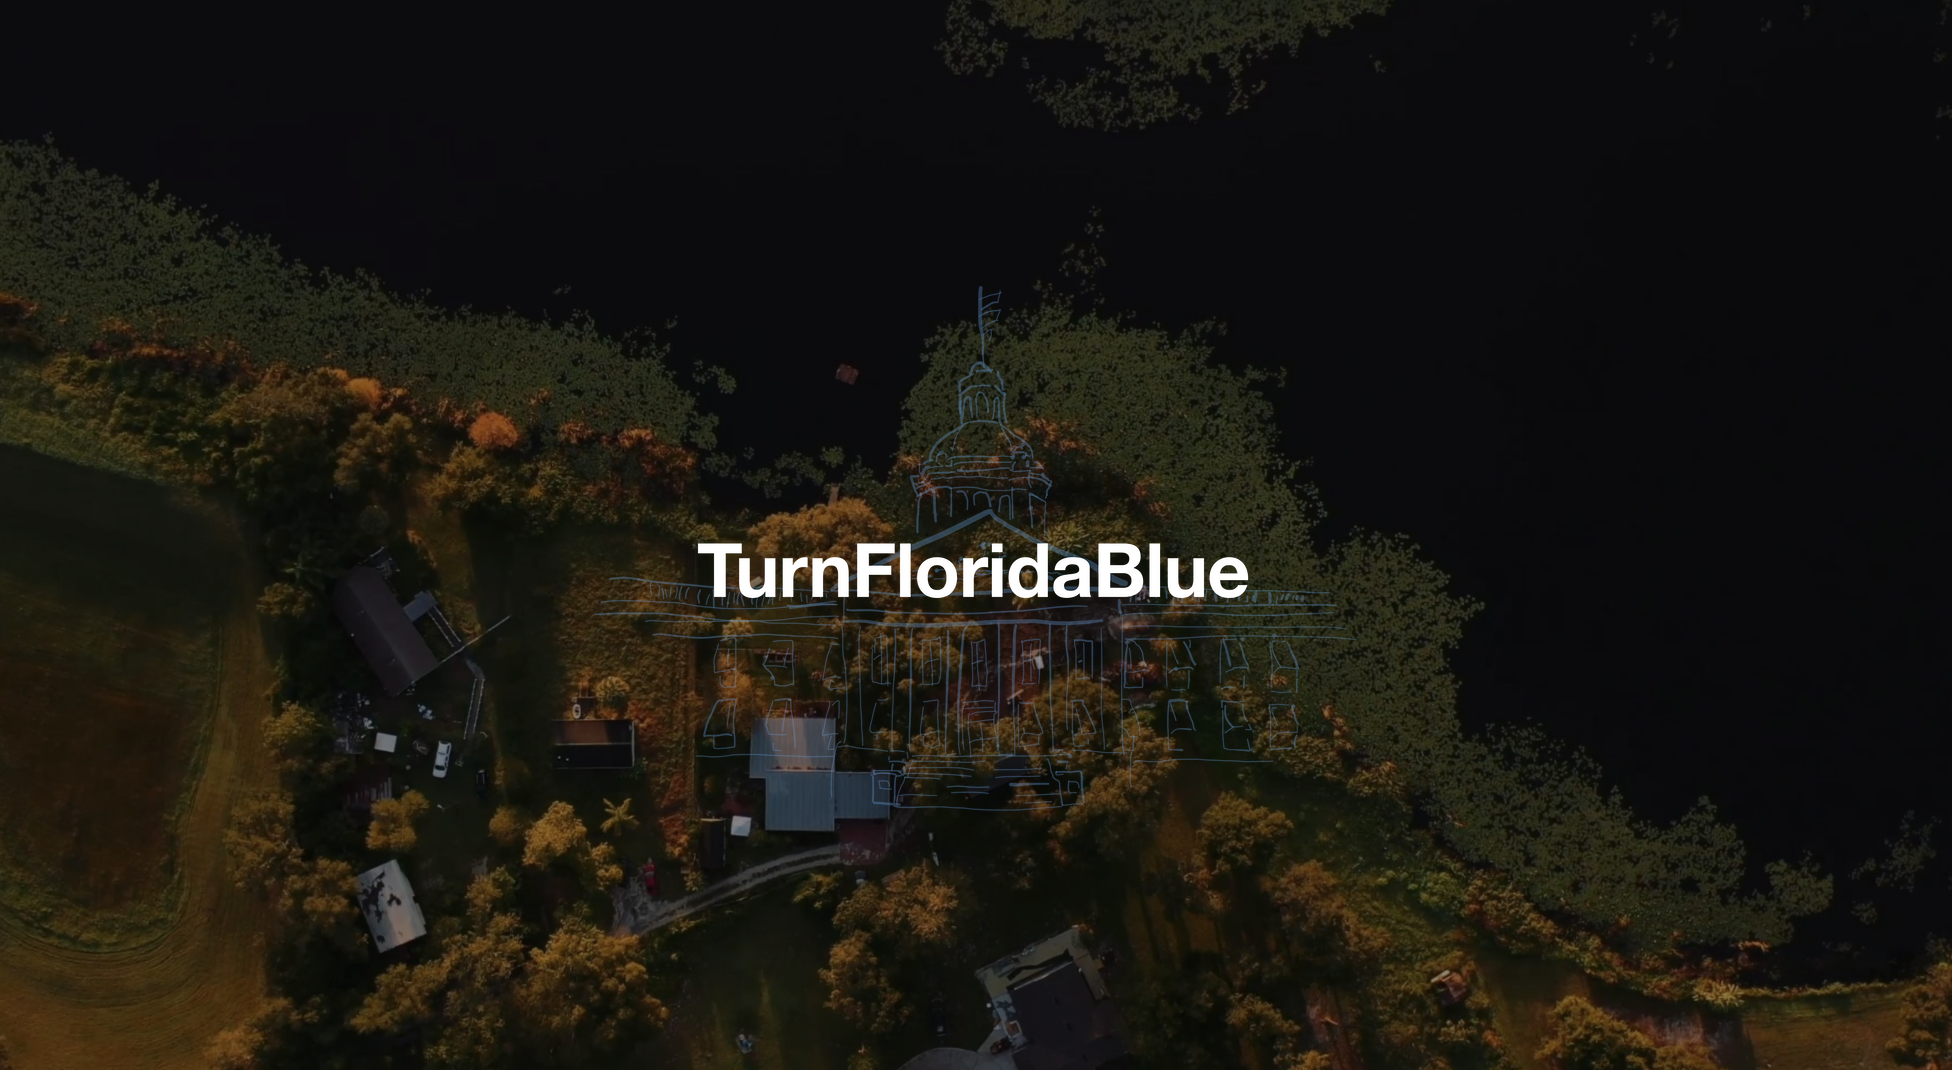 Florida House Victory Campaign Geraldine Thompson Blue and White Turn Florida Blue logo on backdrop of aerial view of properties